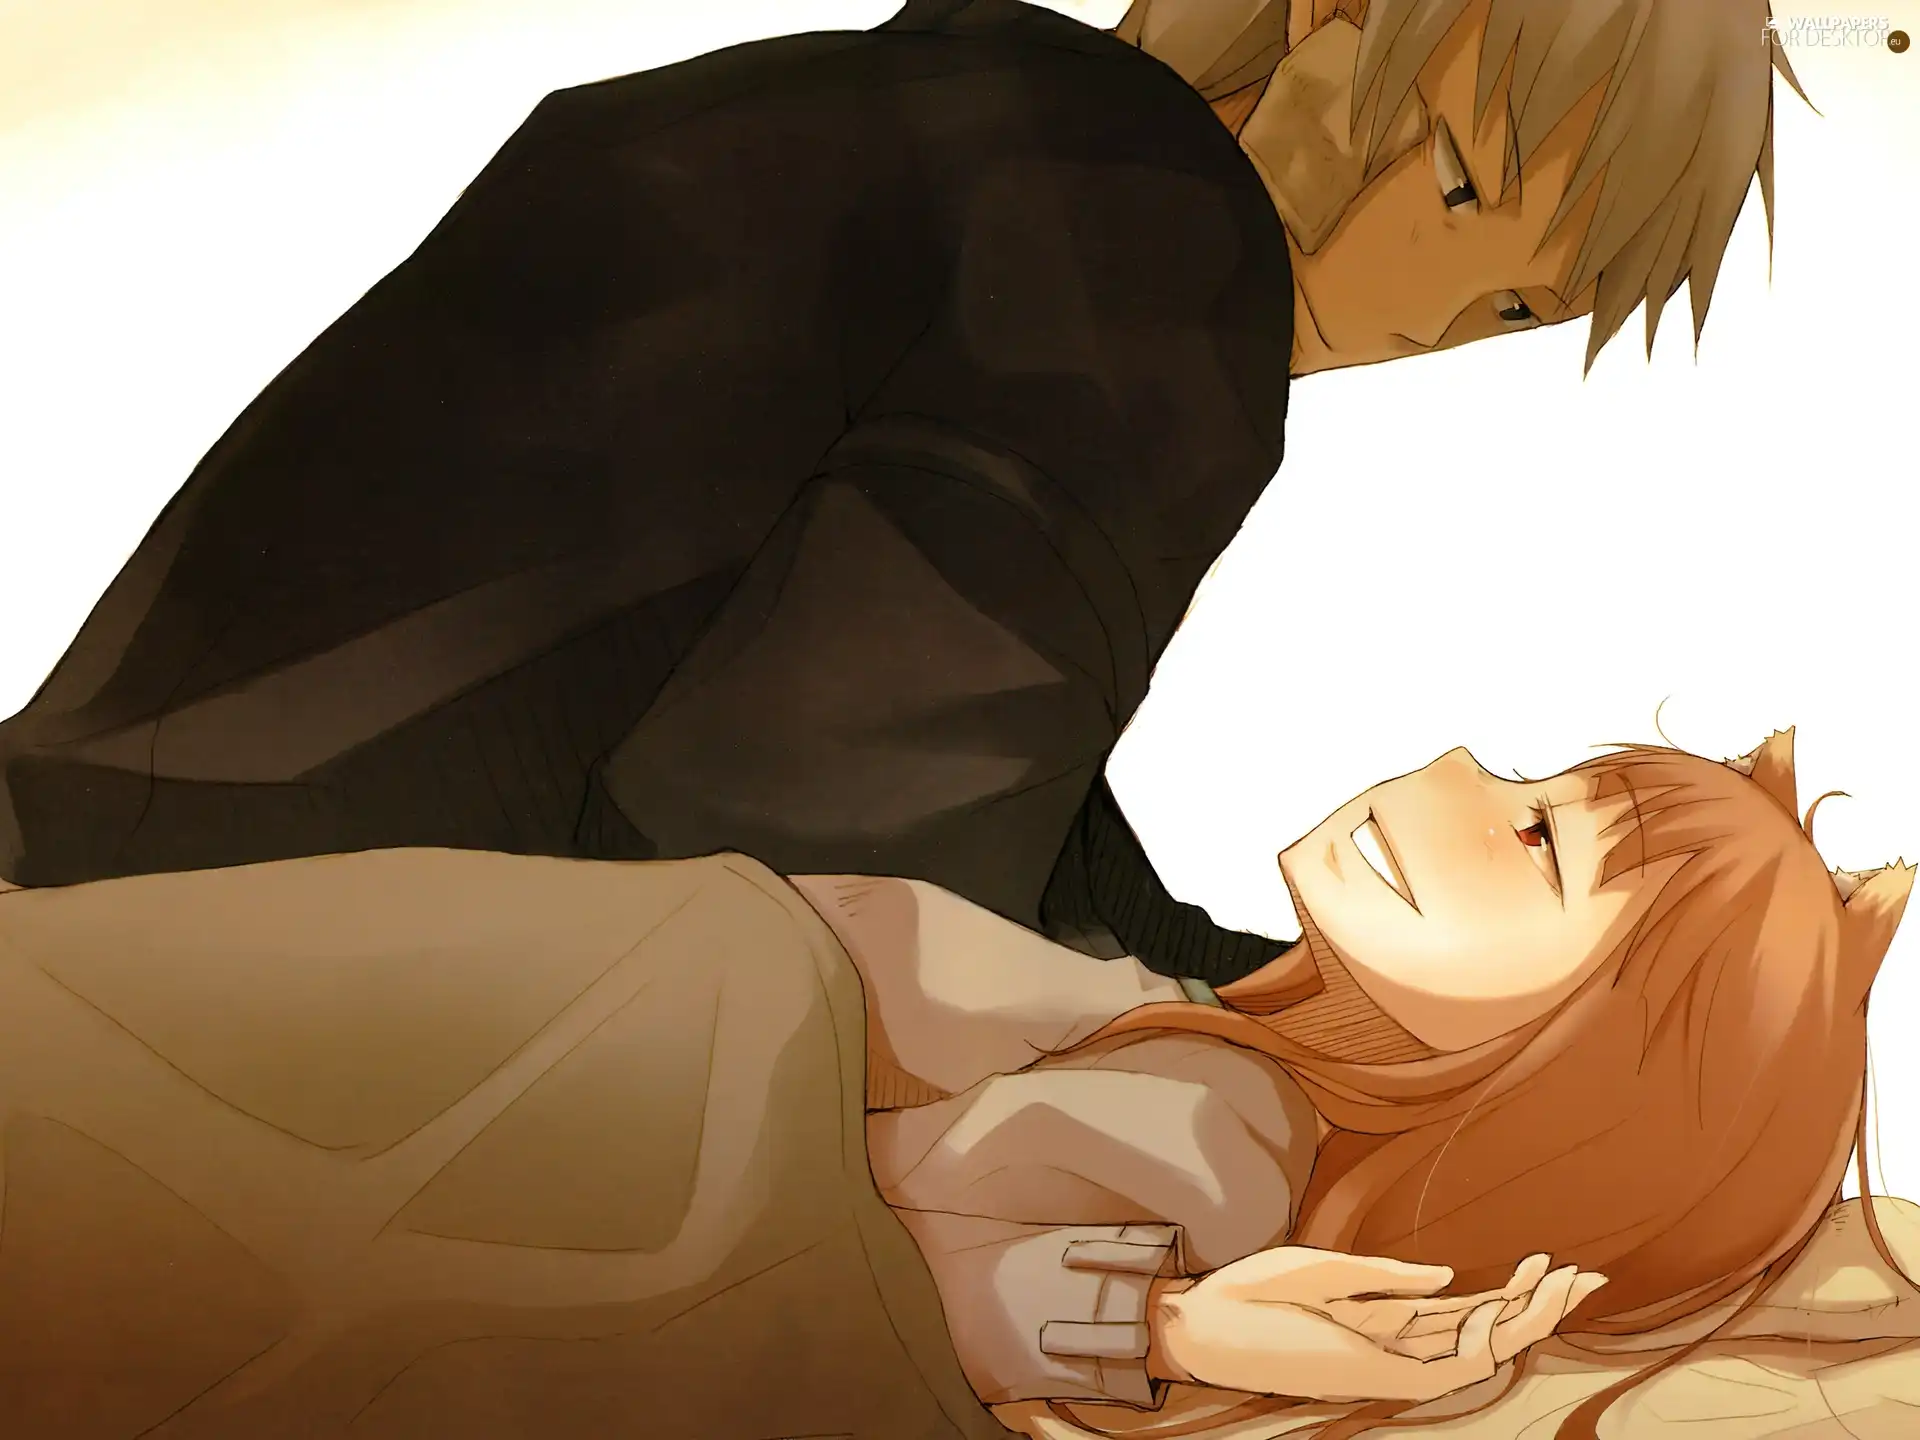 Spice and Wolf, lovers